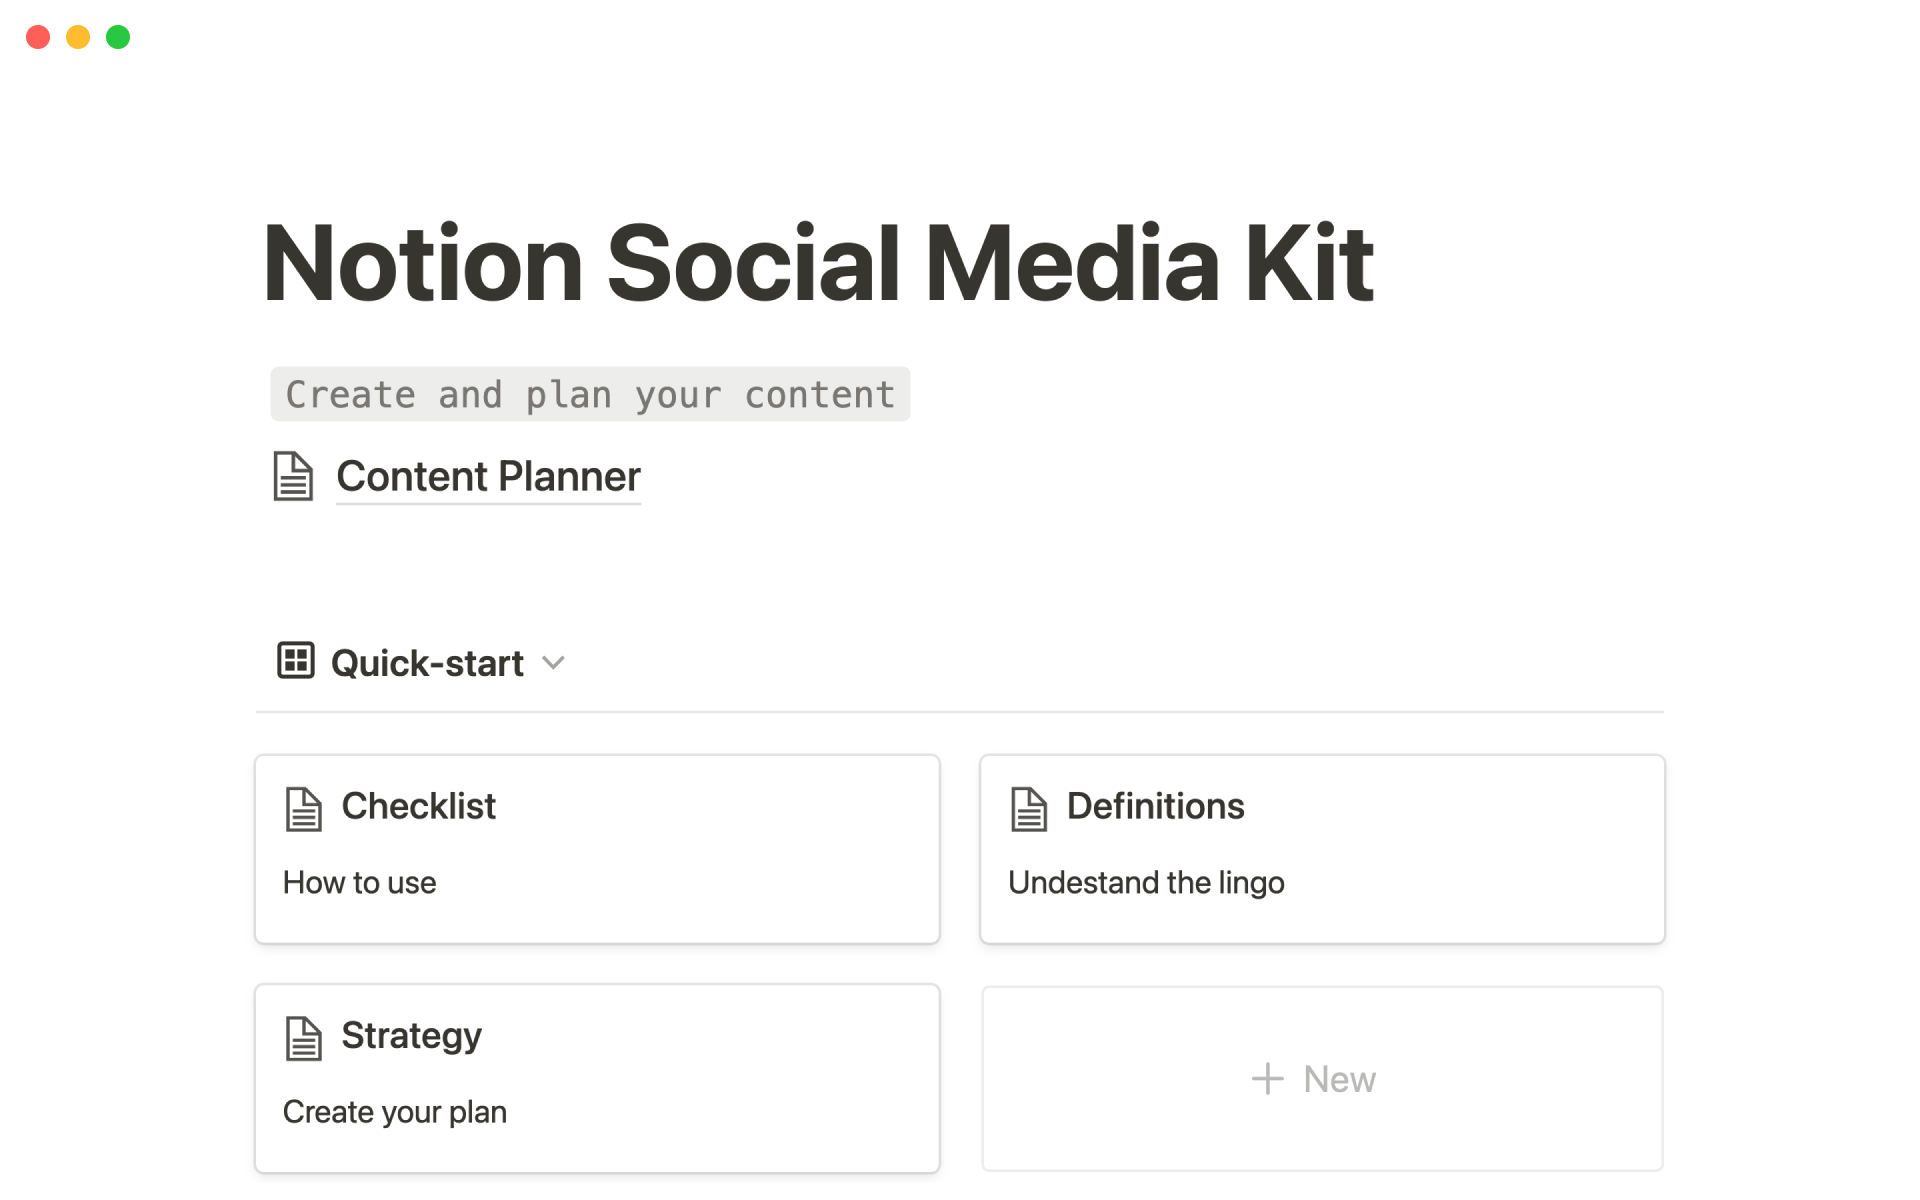 Screenshot of Best 9 Media Kit Templates for Marketing Analysts collection by Notion